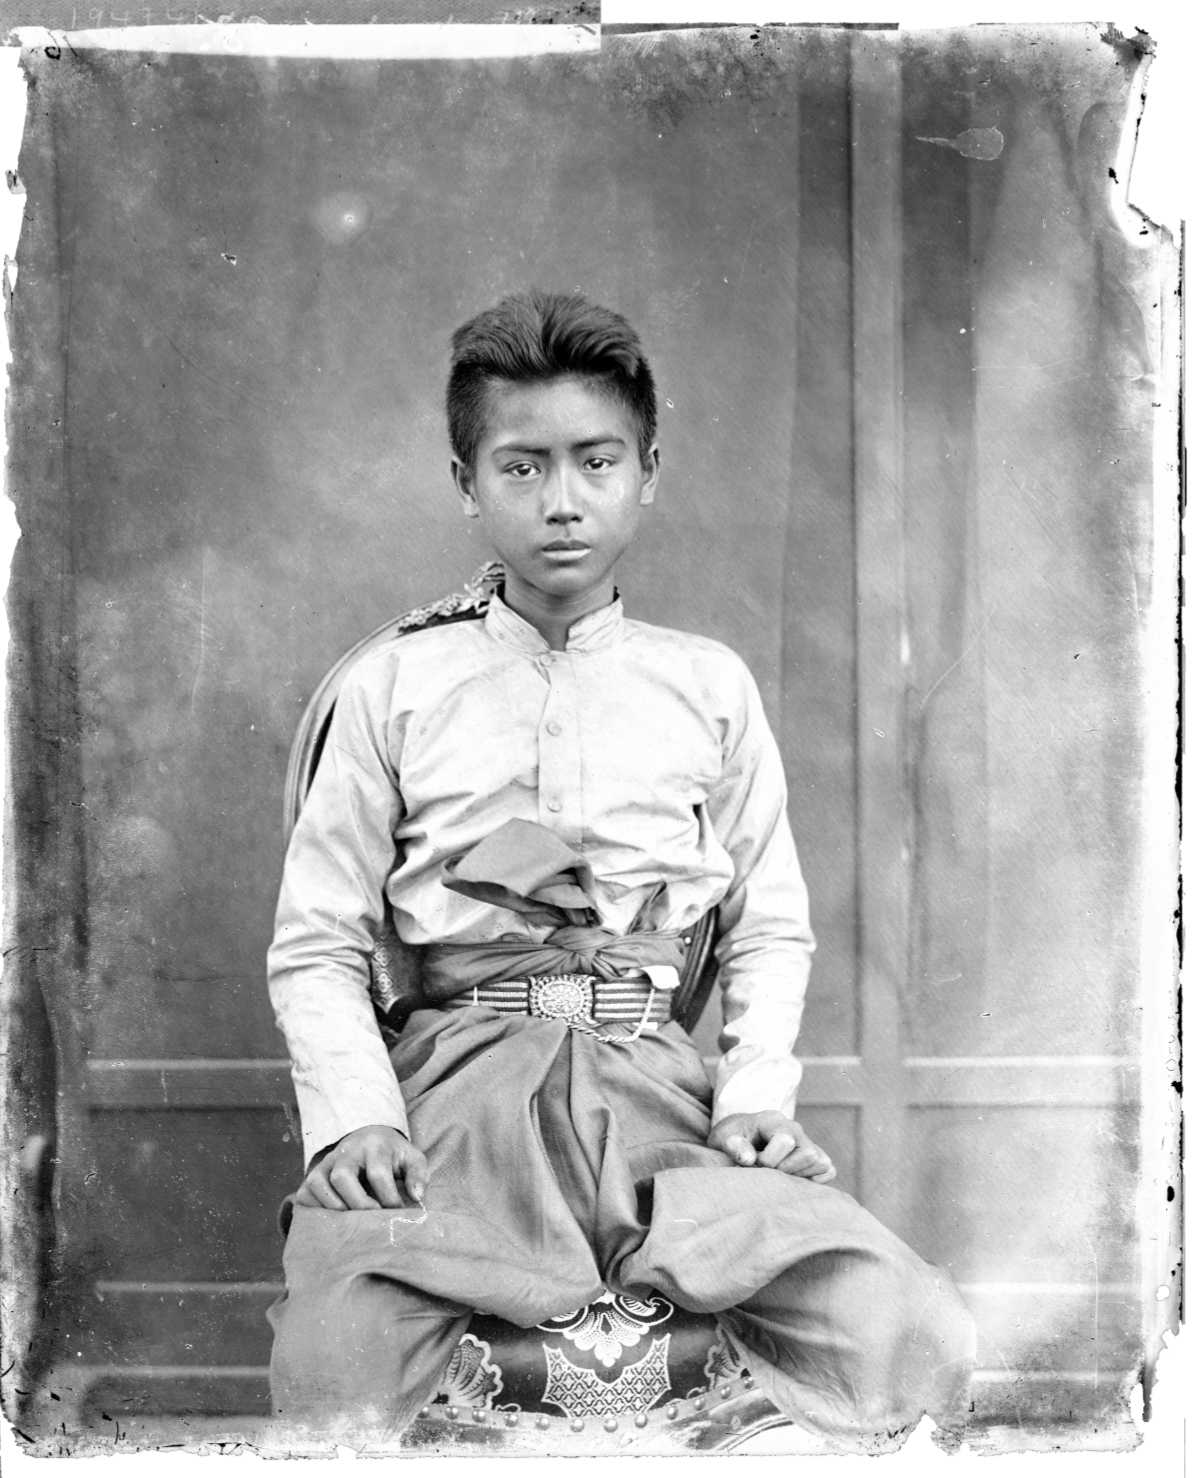 John Thomson / Young Boy, Siam 1865, The Wellcome Collection, London